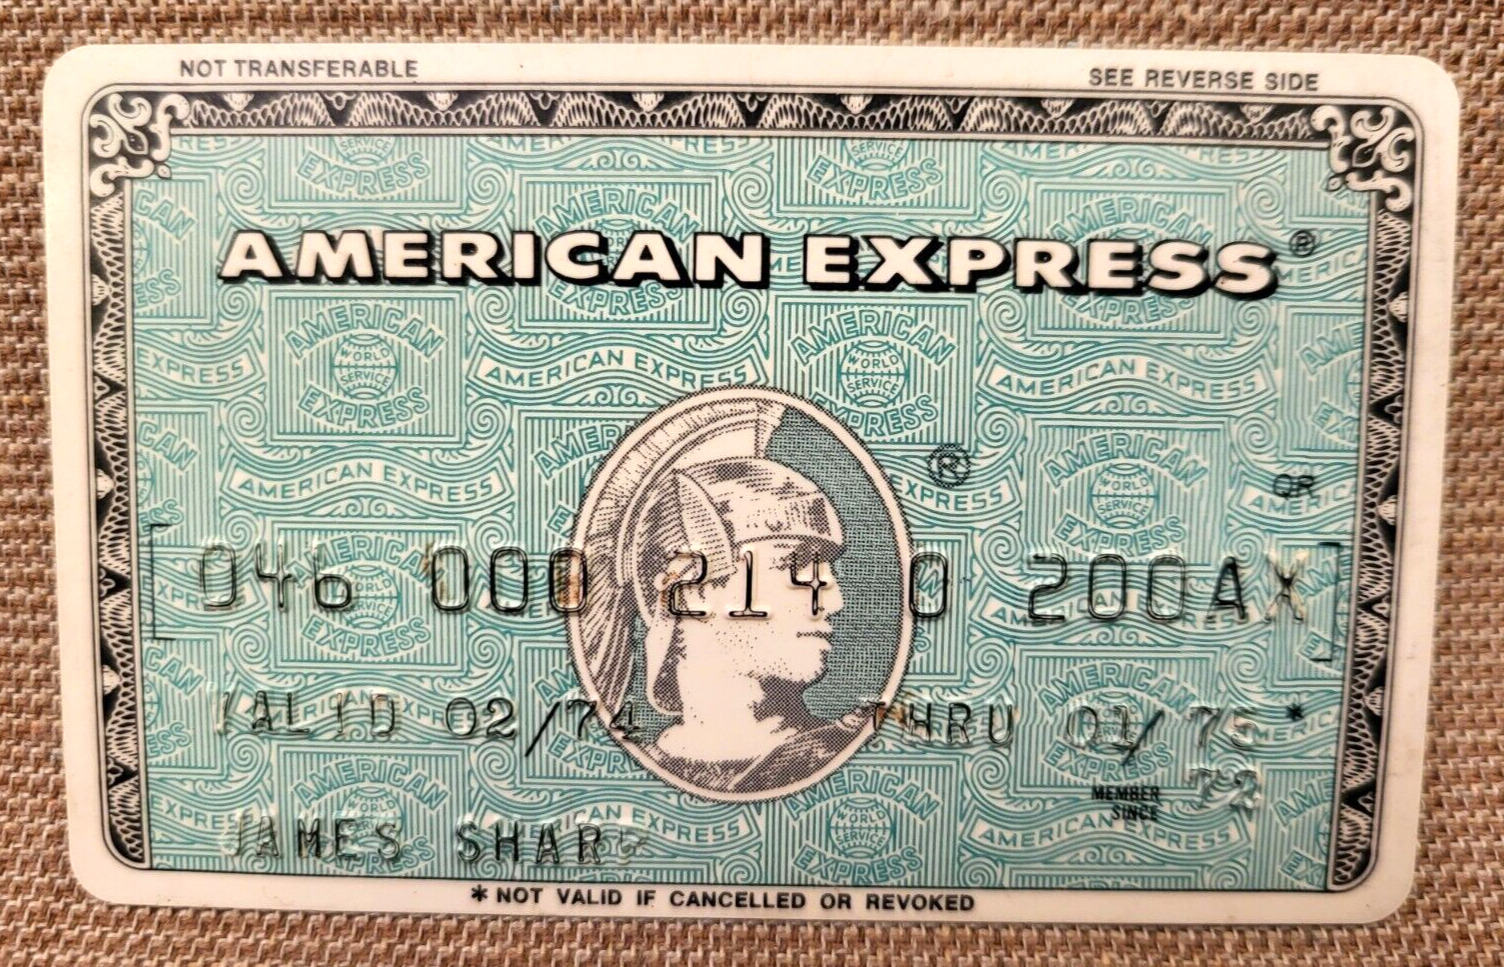 Genuine 1974 1970's Vintage Expired American Express Credit Card